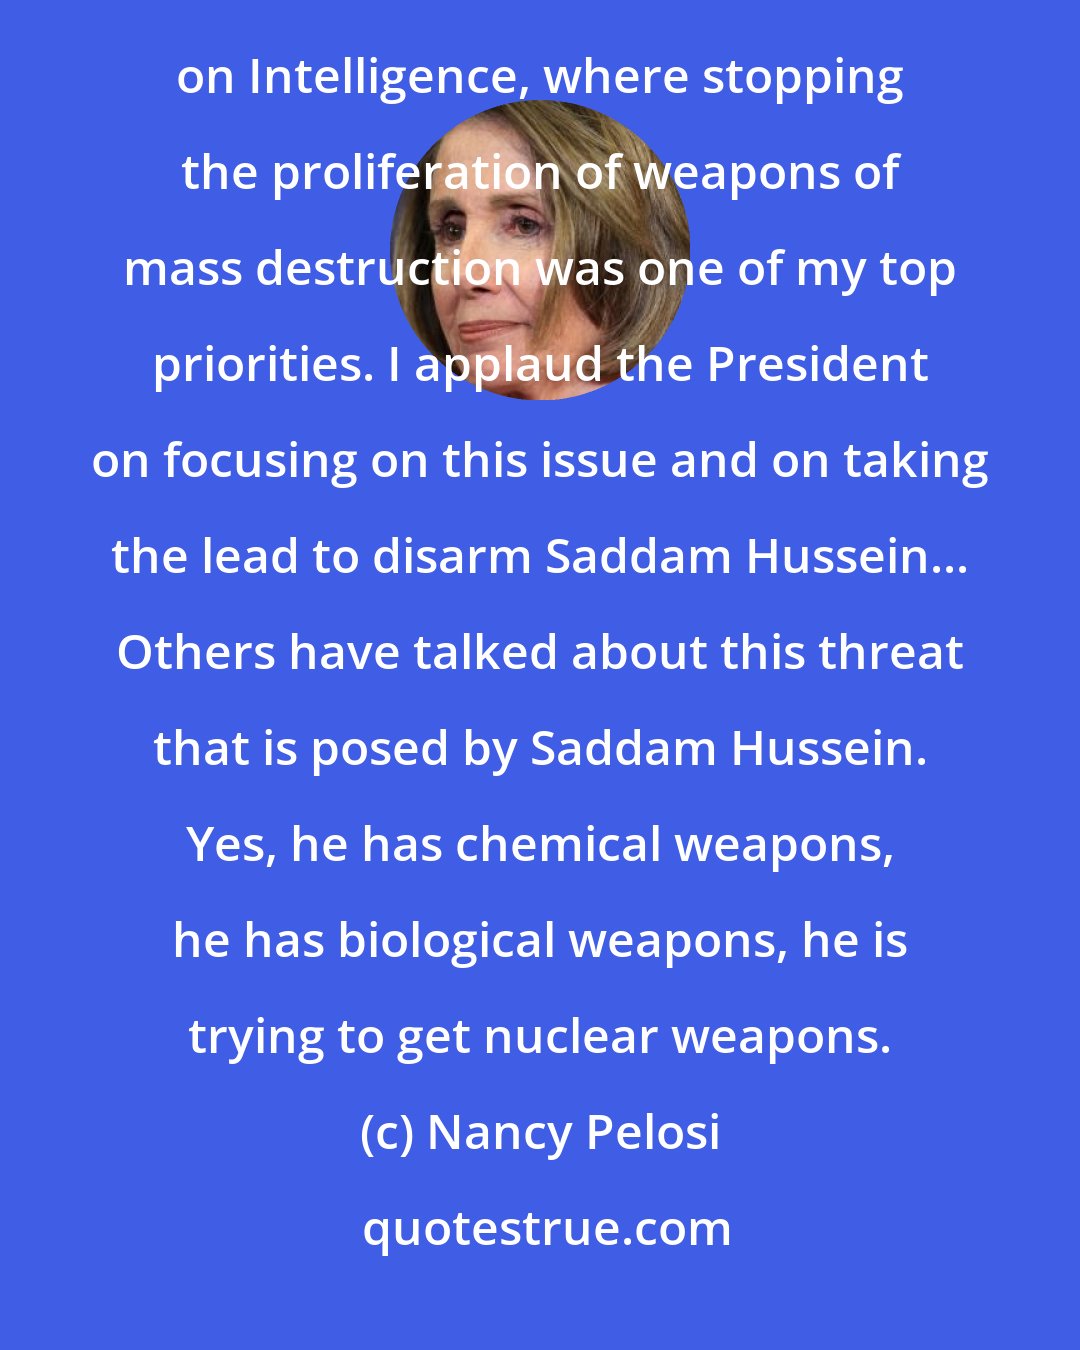 Nancy Pelosi: I come to this debate, Mr. Speaker, as one at the end of 10 years in office on the Permanent Select Committee on Intelligence, where stopping the proliferation of weapons of mass destruction was one of my top priorities. I applaud the President on focusing on this issue and on taking the lead to disarm Saddam Hussein... Others have talked about this threat that is posed by Saddam Hussein. Yes, he has chemical weapons, he has biological weapons, he is trying to get nuclear weapons.